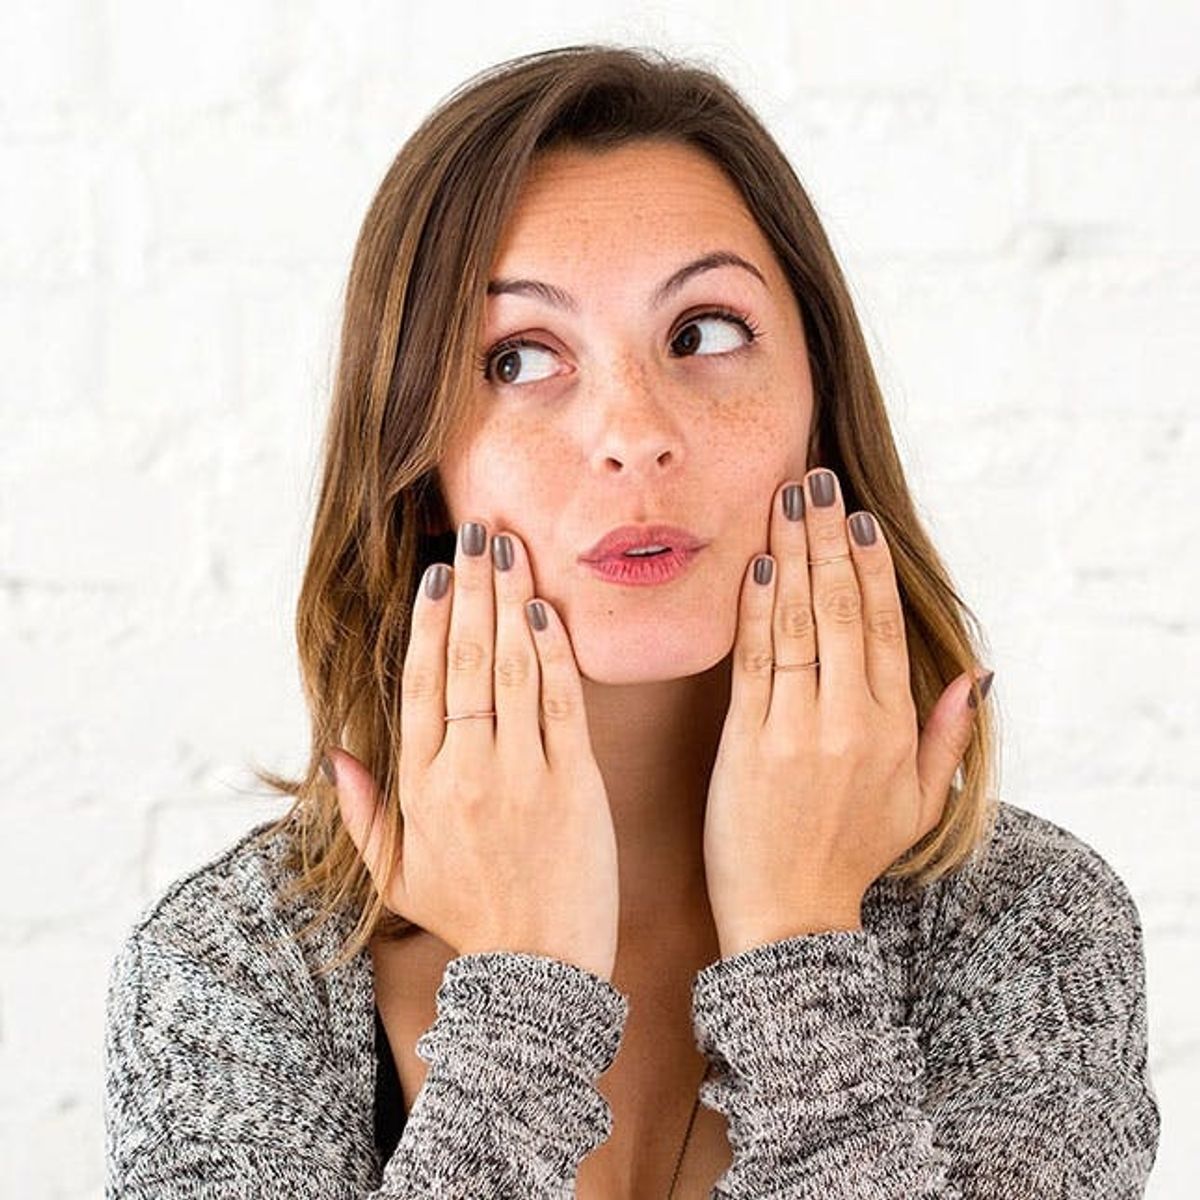 Beauty Mythbuster: Is a Mascara Wand the Secret to Perfect DIY Manicures?